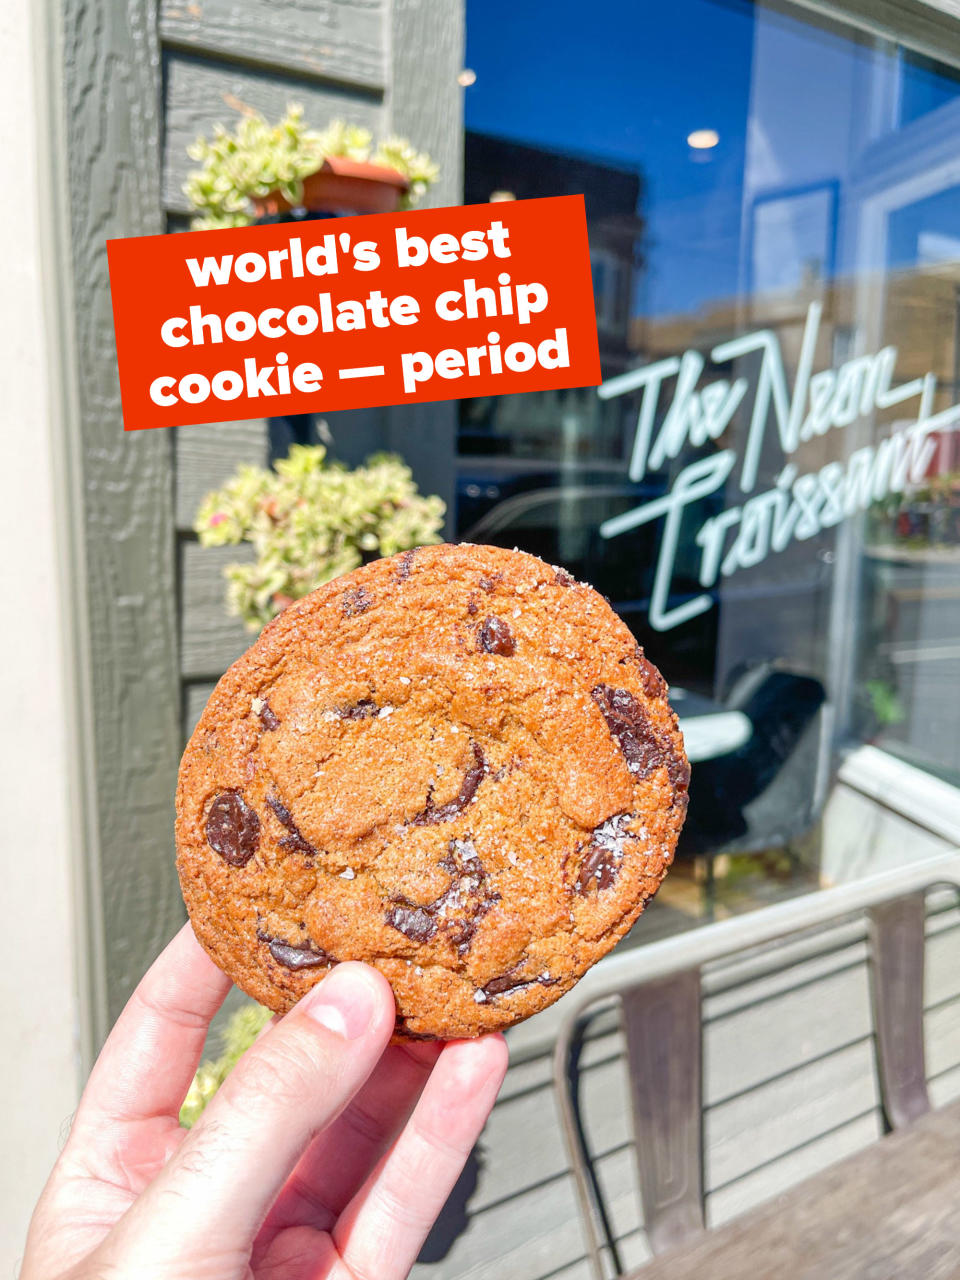 A hand holding a chocolate chip cookie with the text "World's best chocolate chip cookie; period"